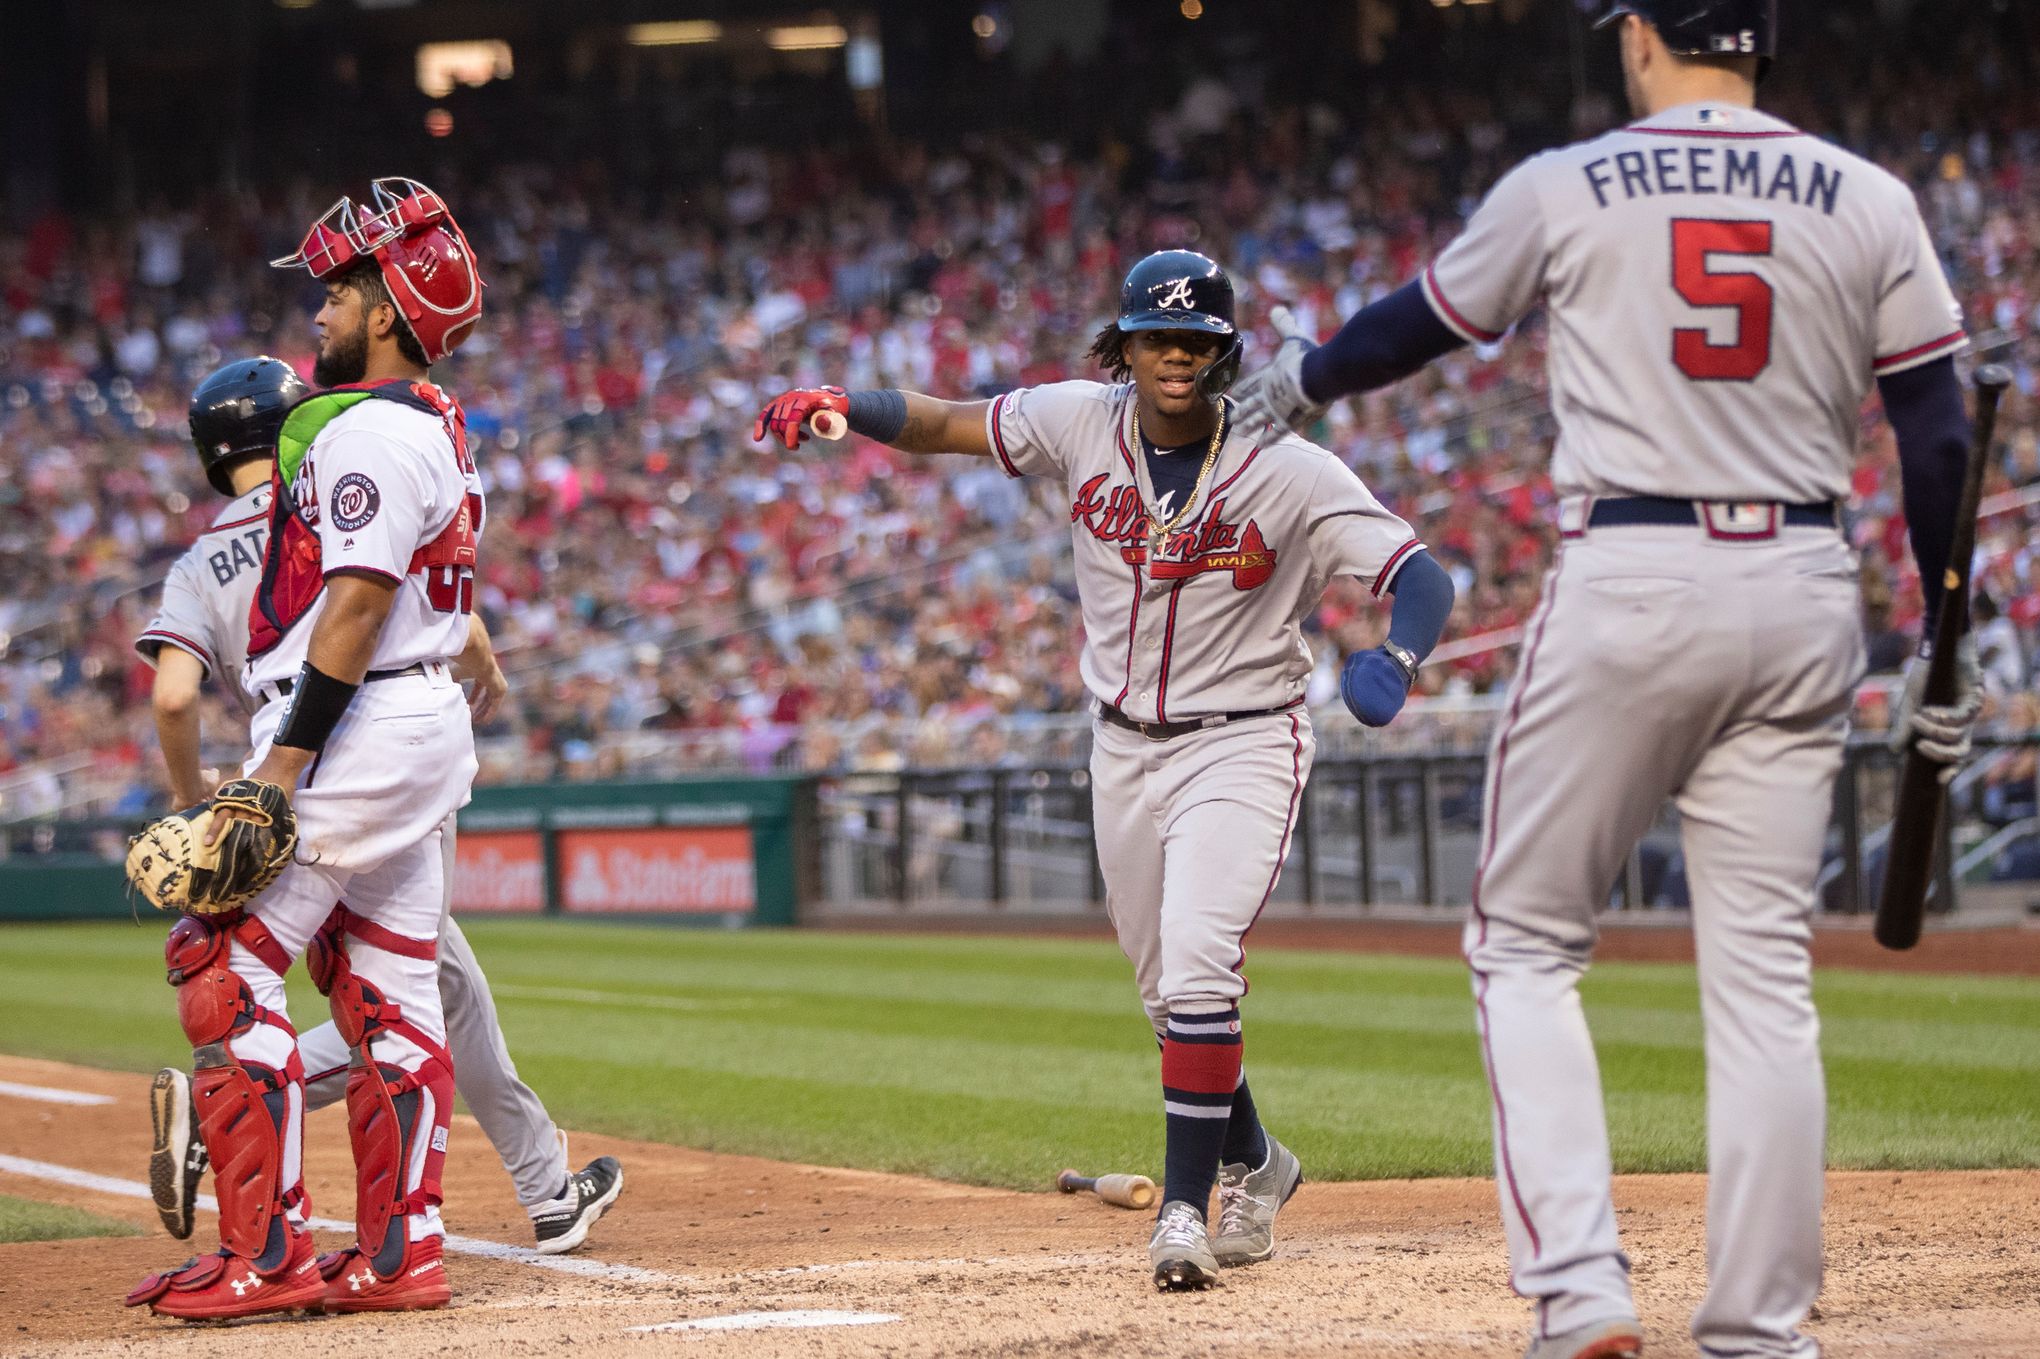 Braves clinch playoff spot behind Acuña Jr.